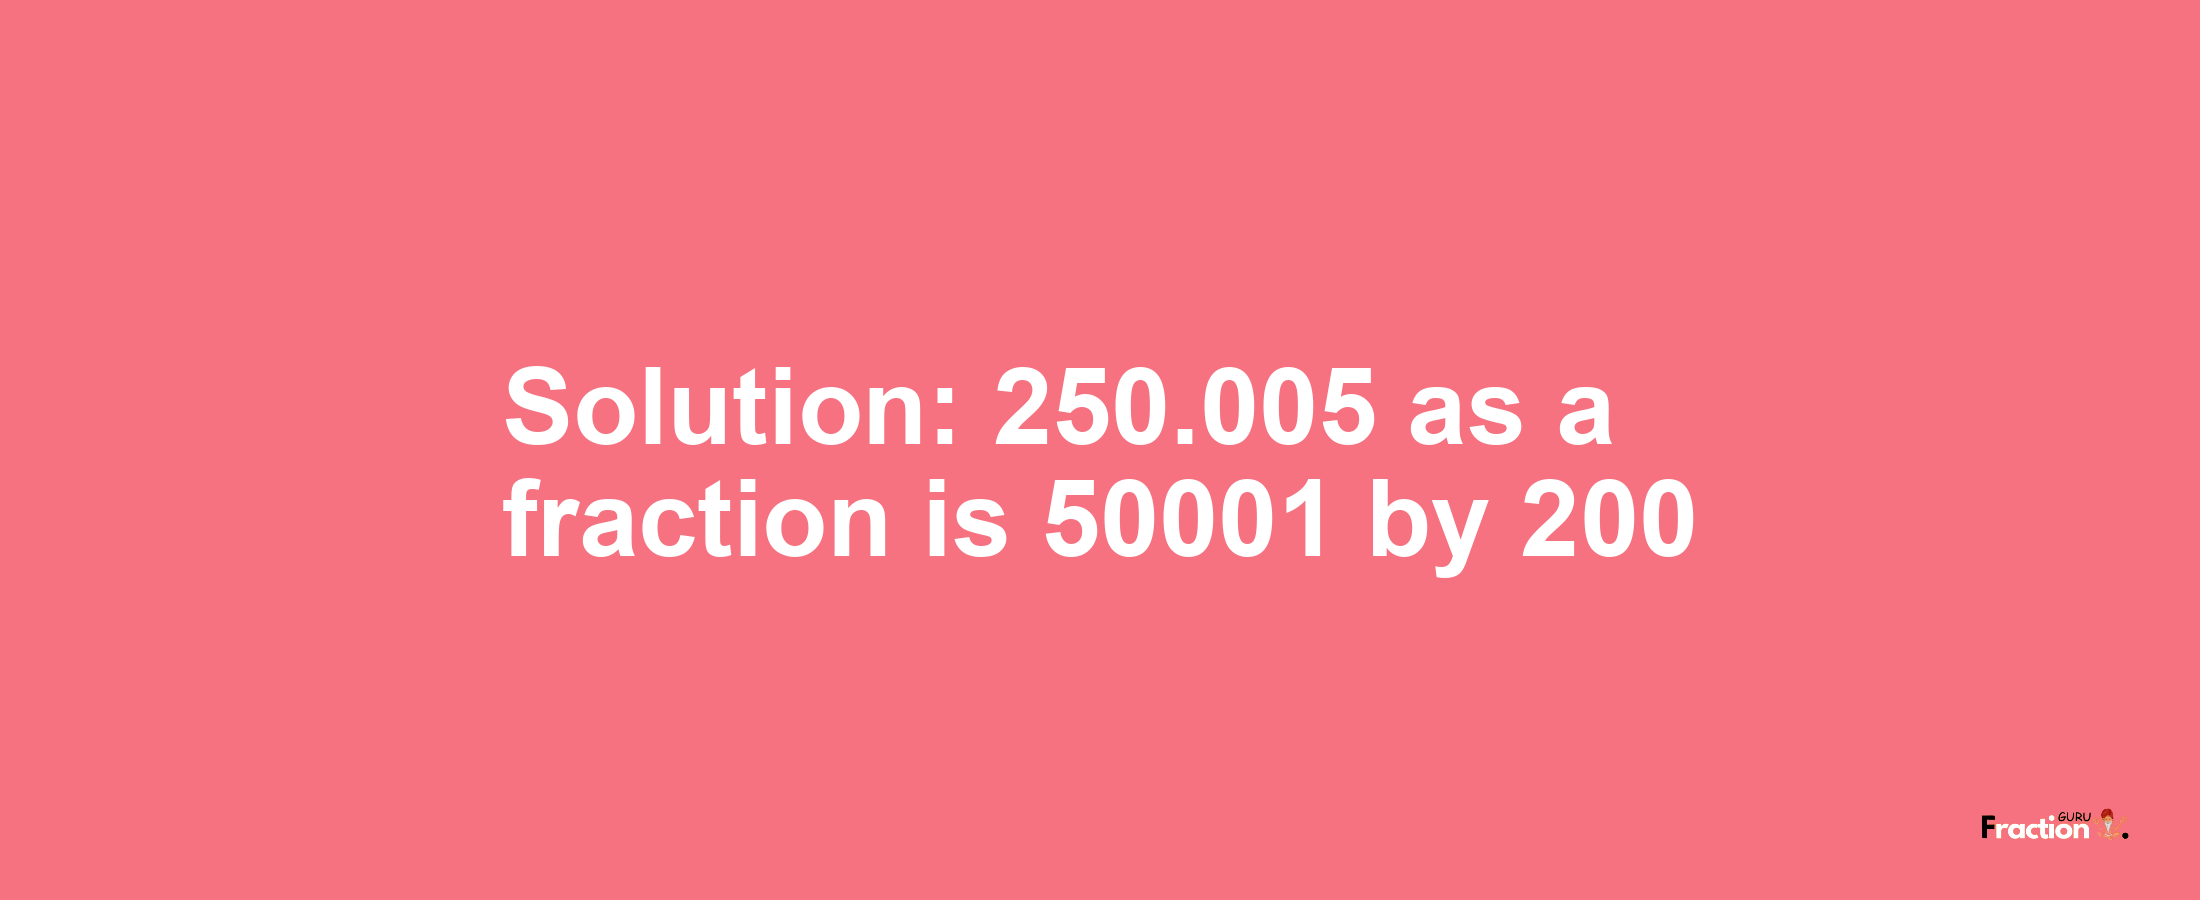 Solution:250.005 as a fraction is 50001/200